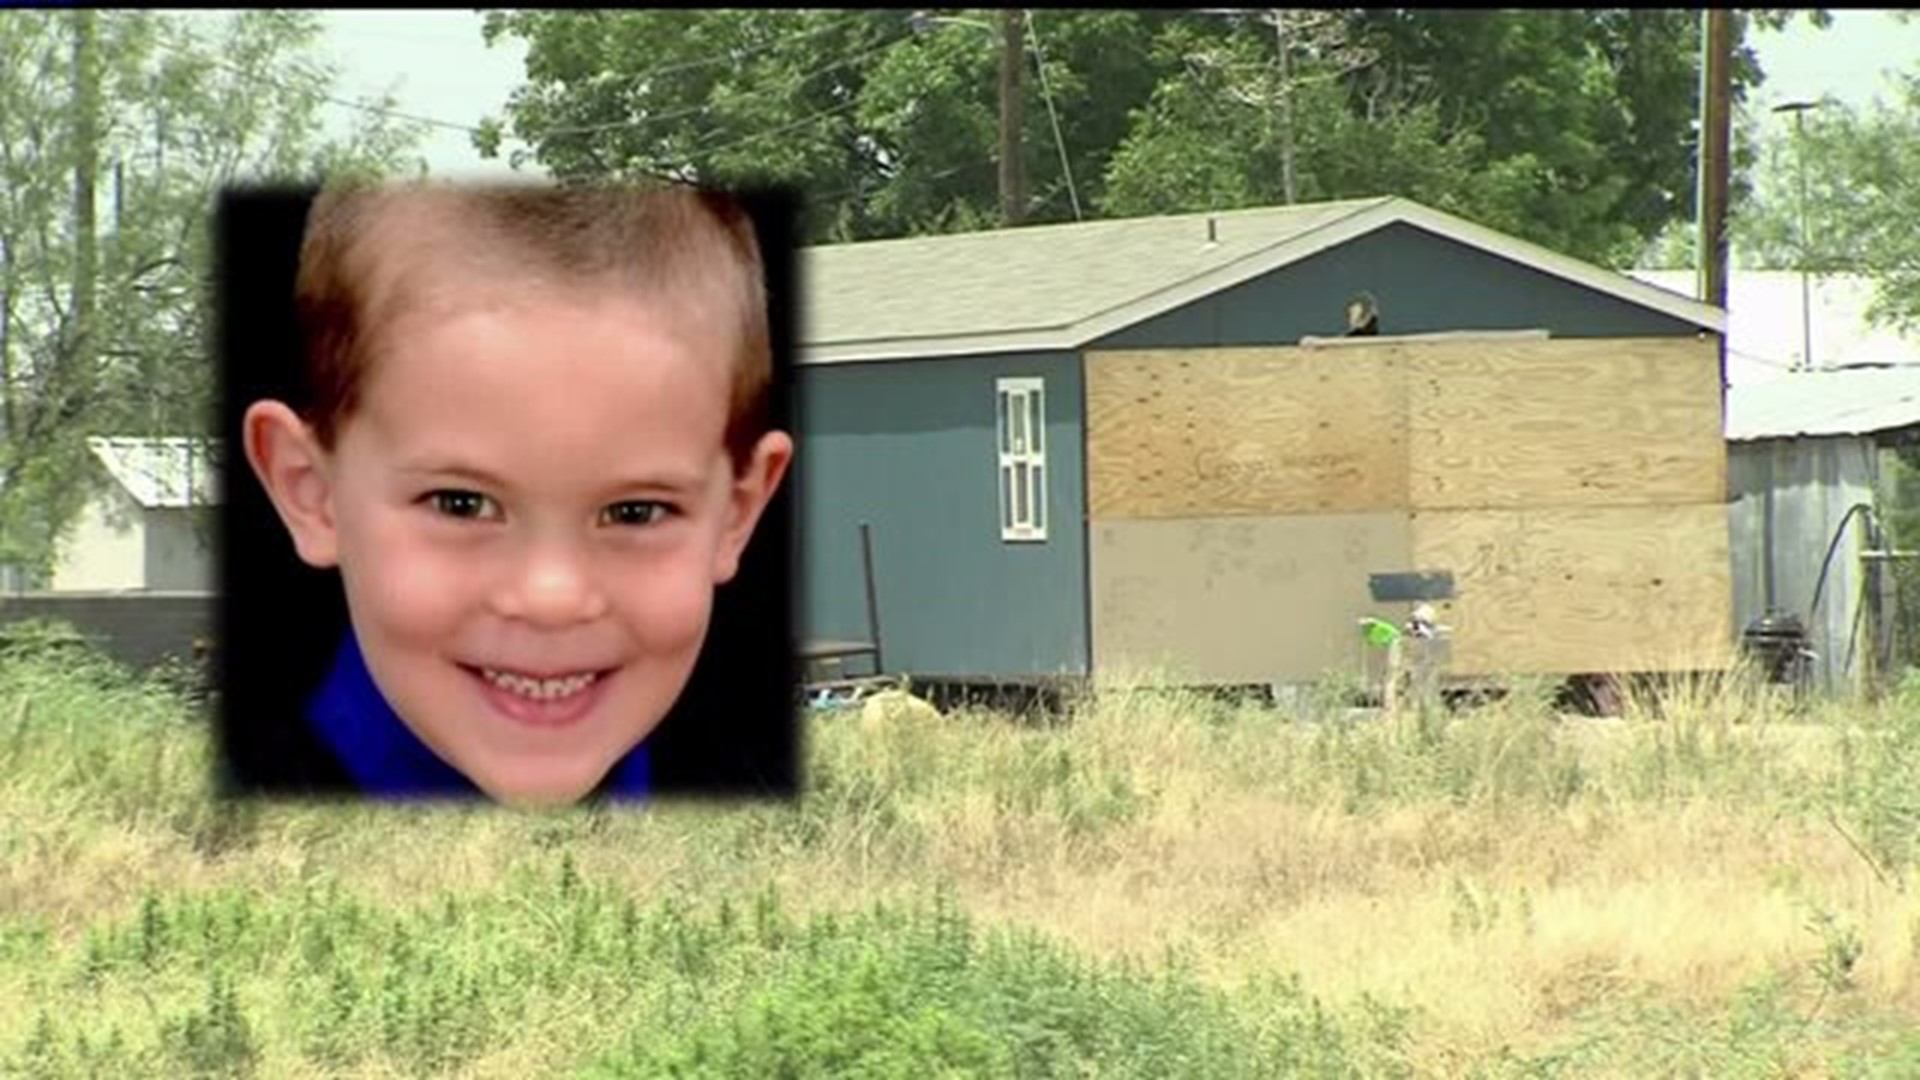 Father watches as drunk driver crashes into his home, killing 4-year-old son